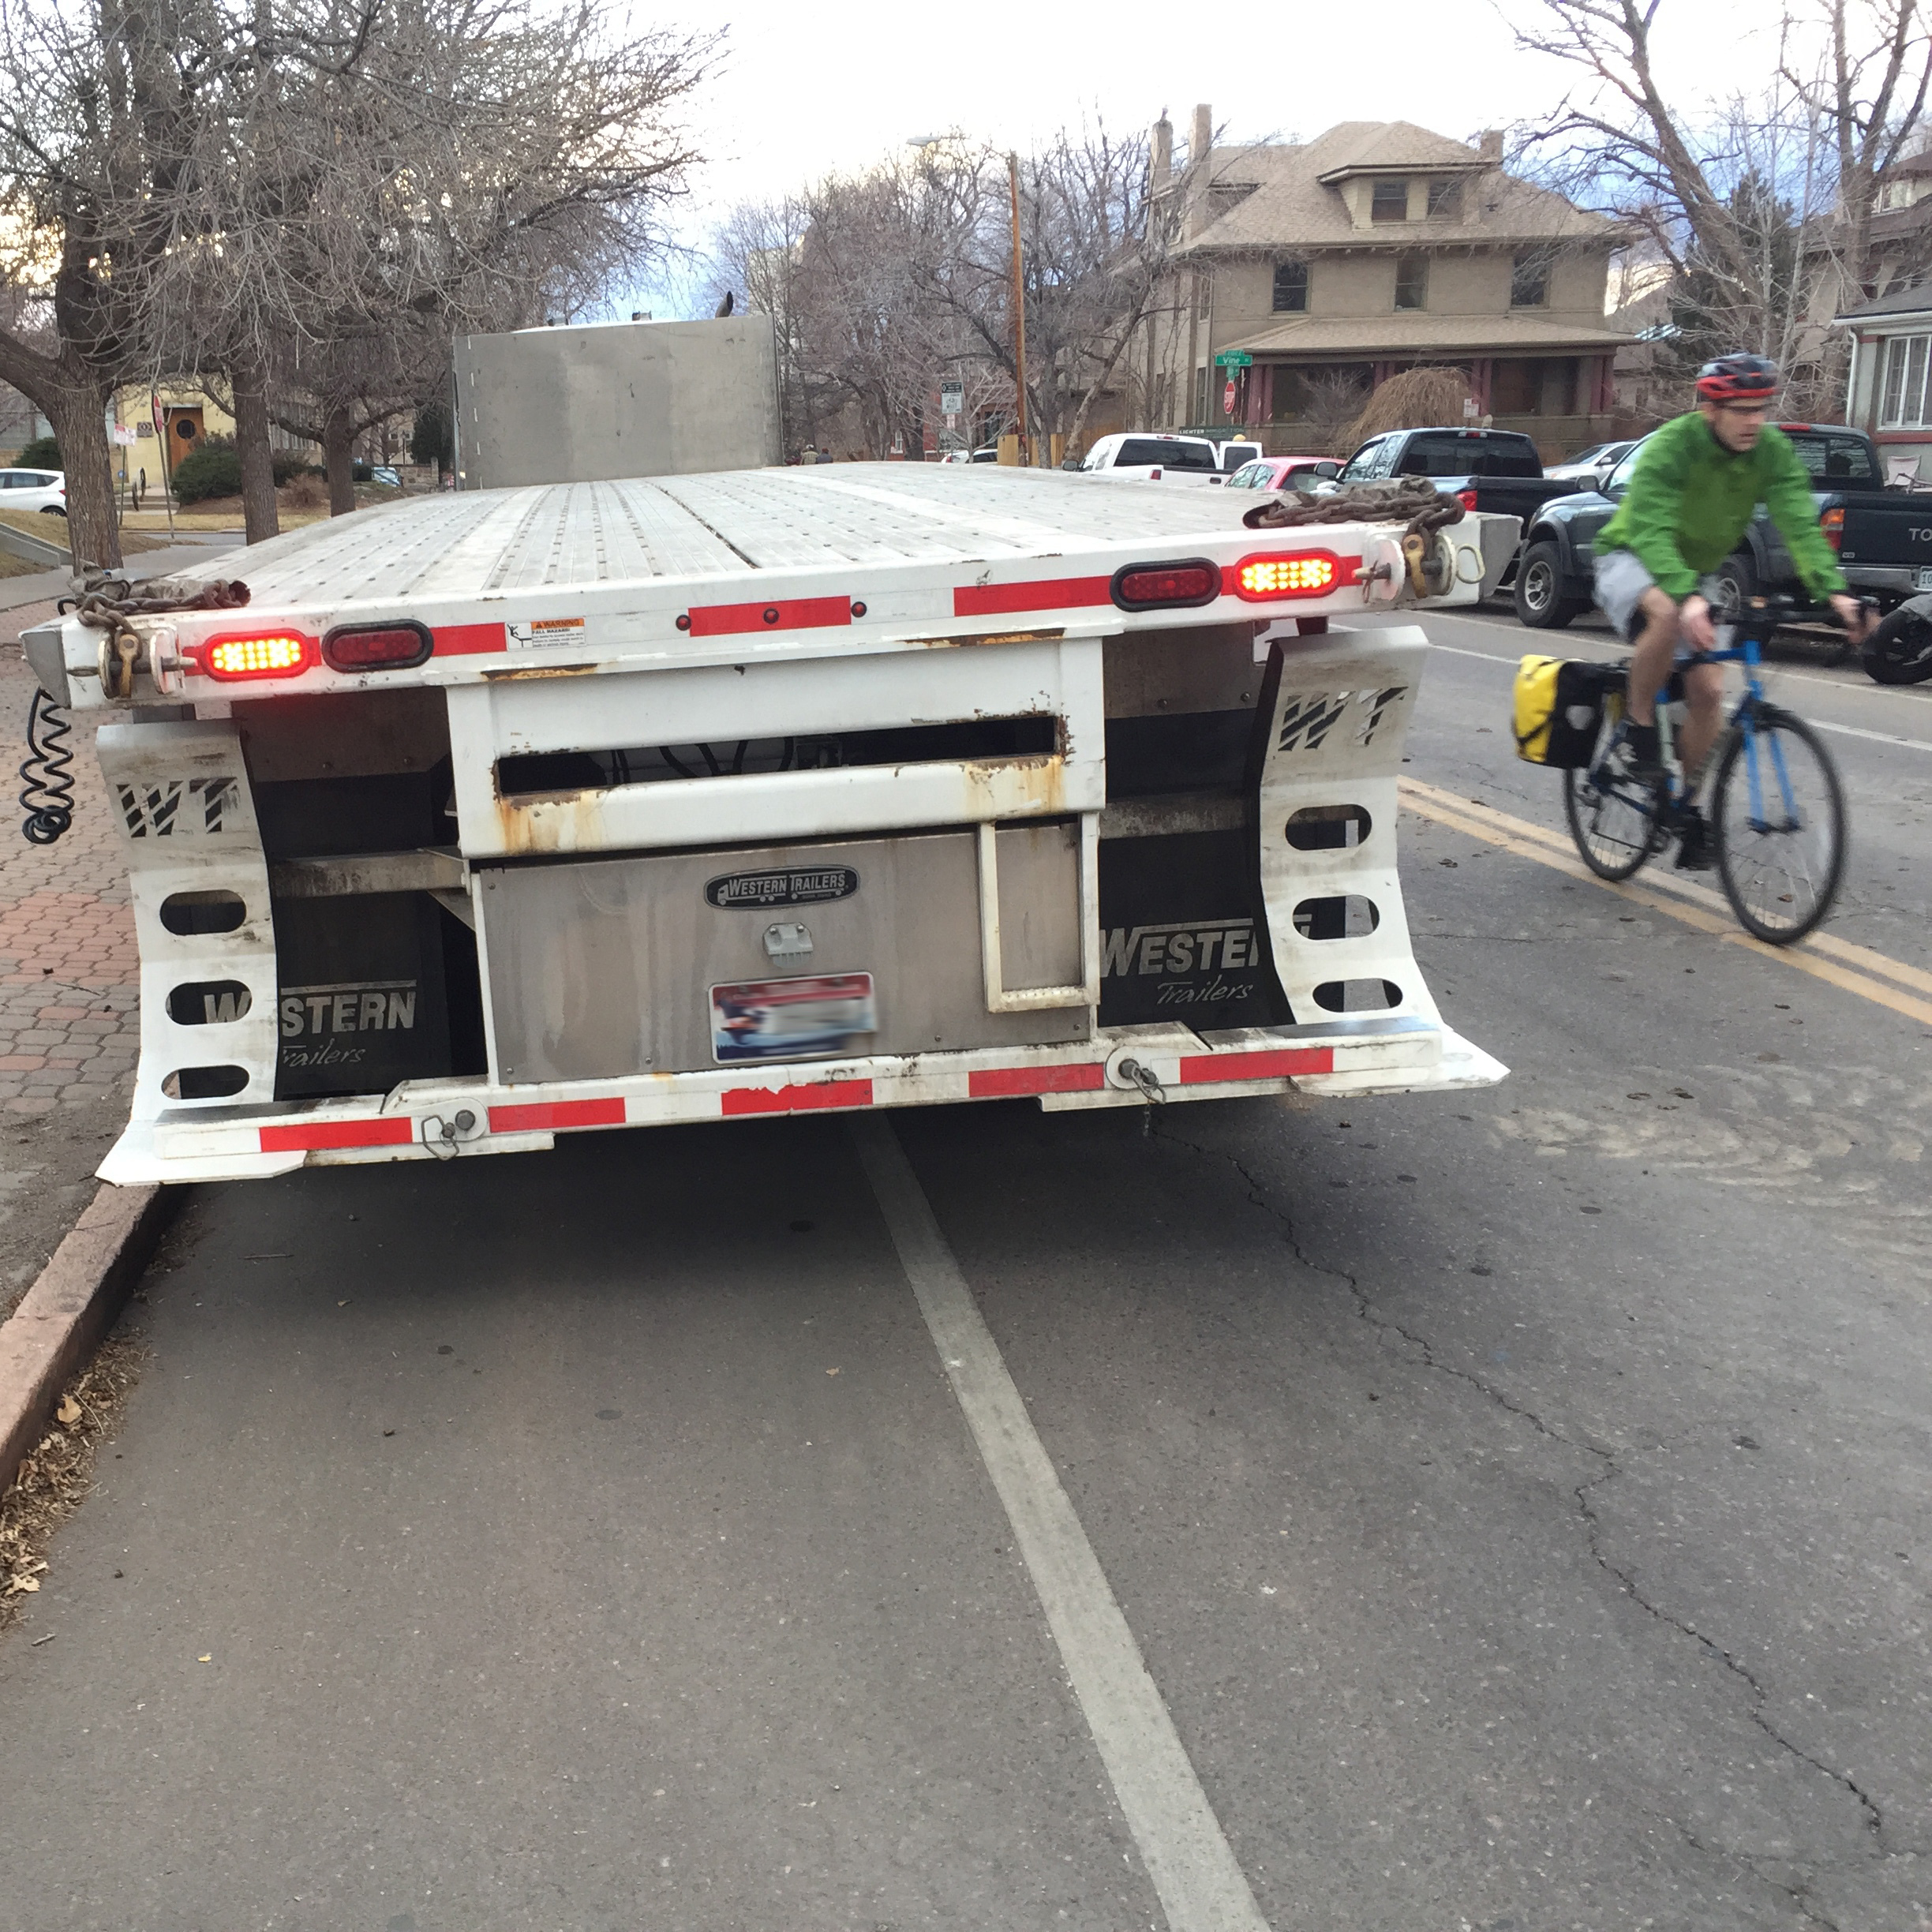 A person biking into the street because there is a large truck parked in a bike lane.